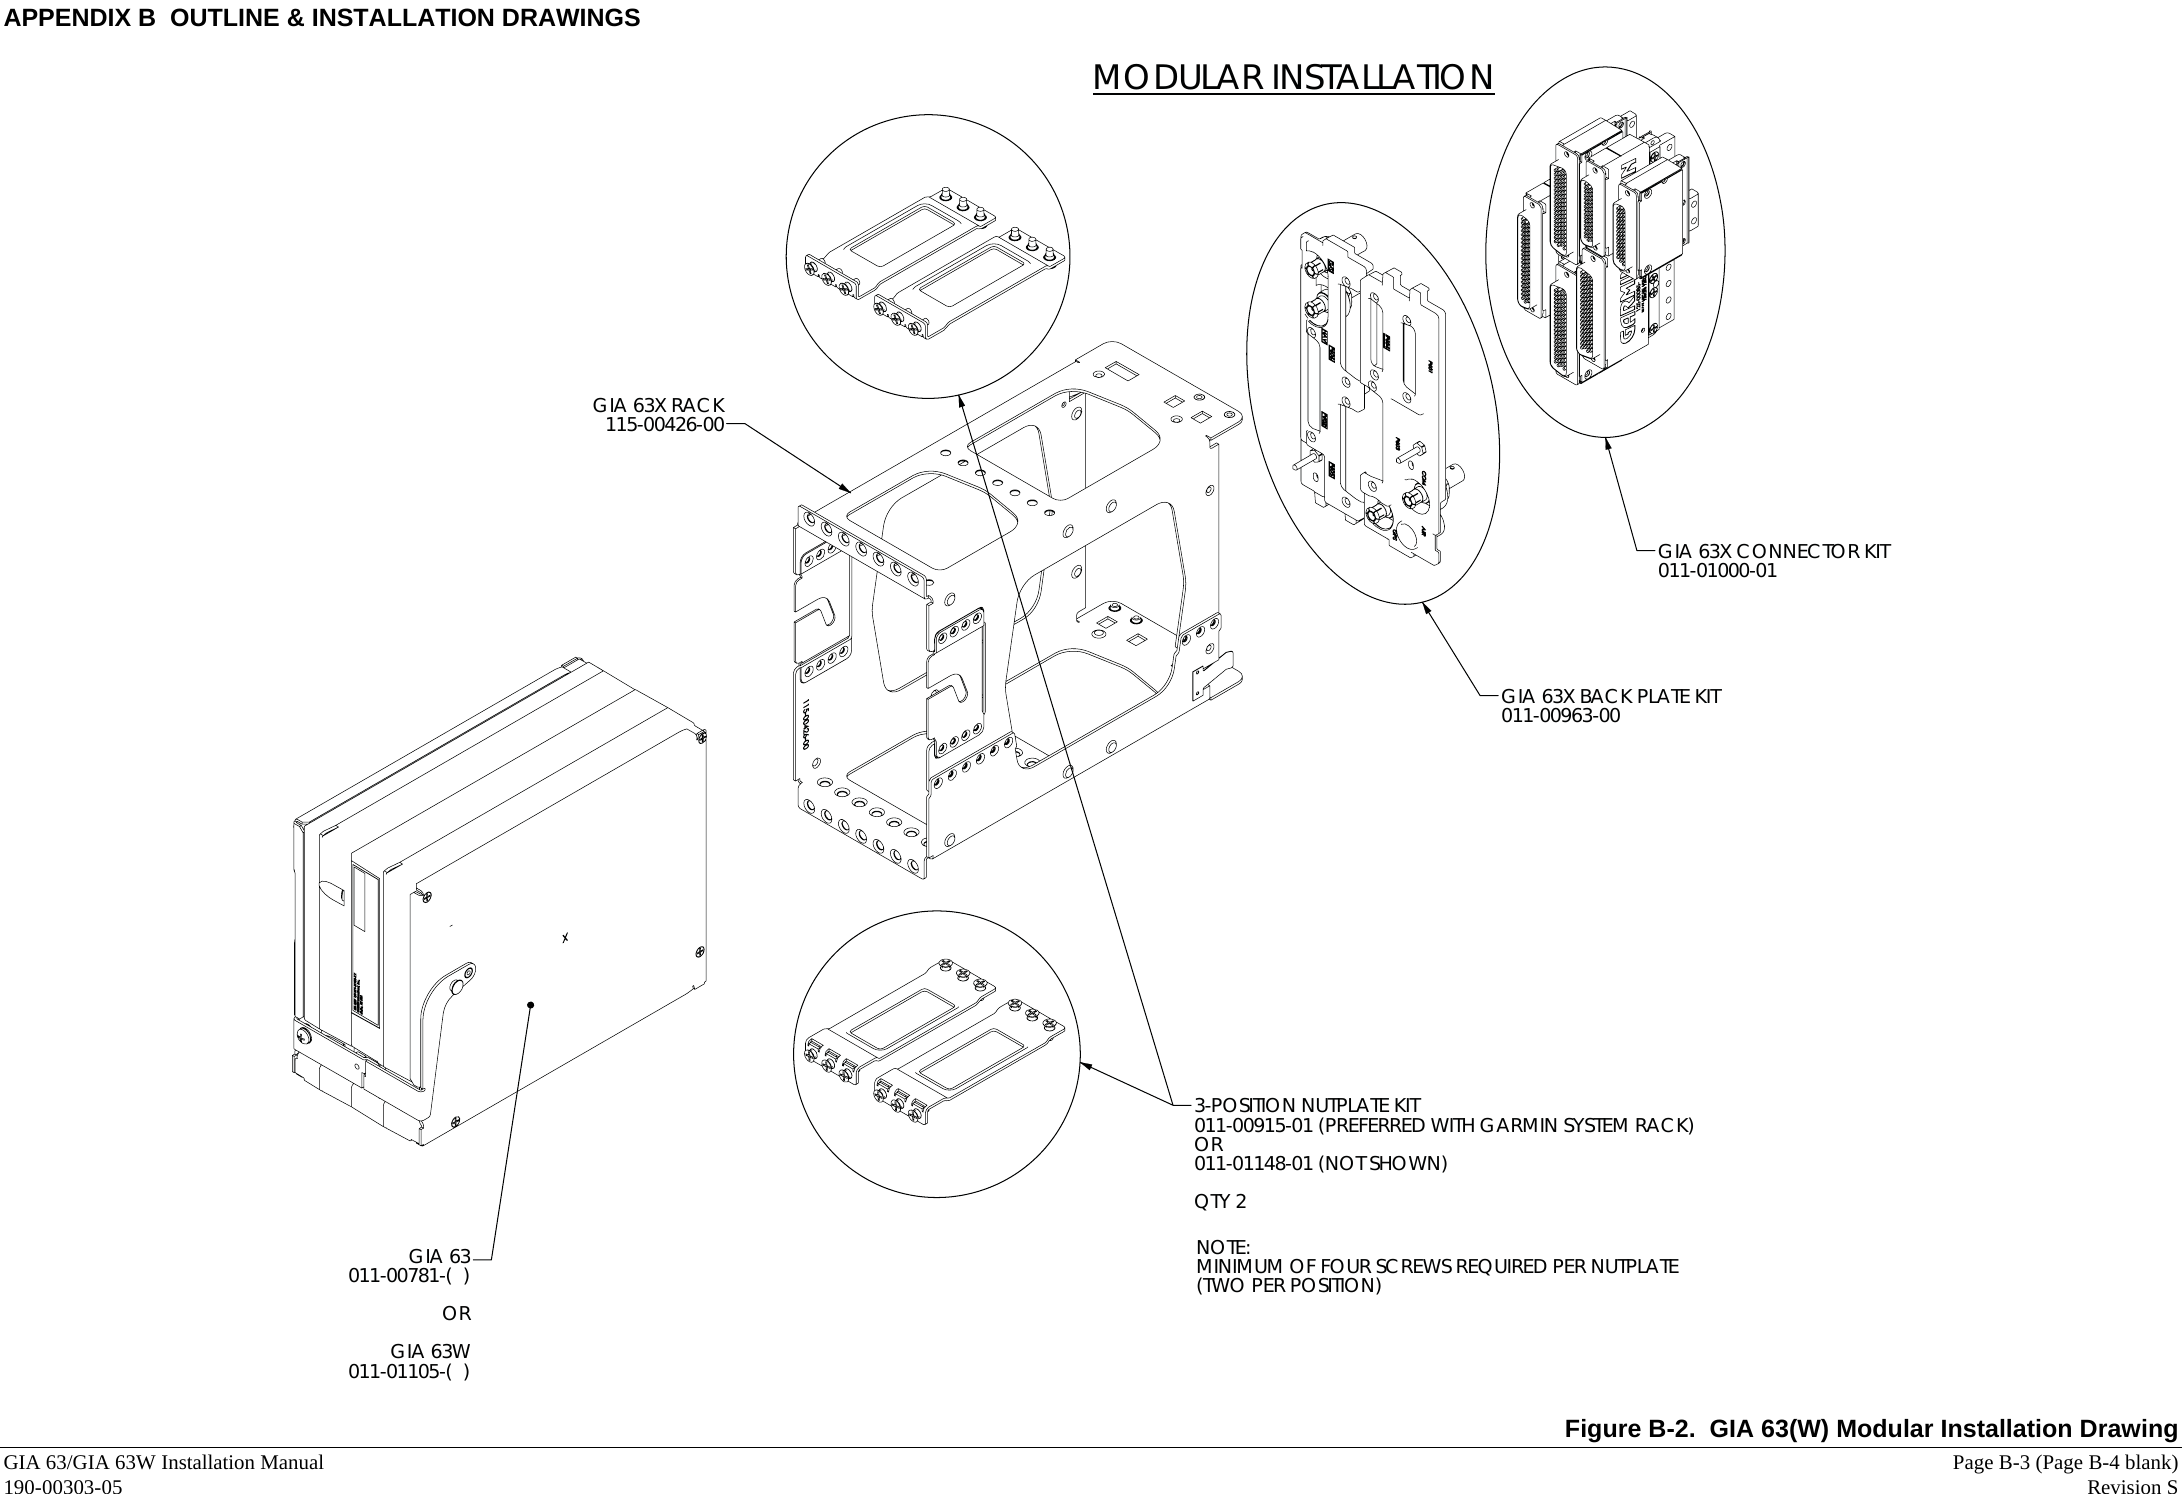 APPENDIX B  OUTLINE &amp; INSTALLATION DRAWINGS GIA 63/GIA 63W Installation Manual     Page B-3 (Page B-4 blank) 190-00303-05   Revision S  GIA 63011-00781-(  )ORGIA 63W011-01105-(  )3-POSITION NUTPLATE KIT011-00915-01 (PREFERRED WITH GARMIN SYSTEM RACK)OR011-01148-01 (NOT SHOWN)QTY 2GIA 63X BACK PLATE KIT011-00963-00GIA 63X CONNECTOR KIT011-01000-01GIA 63X RACK115-00426-00NOTE:MINIMUM OF FOUR SCREWS REQUIRED PER NUTPLATE(TWO PER POSITION)MODULAR INSTALLATION  Figure B-2.  GIA 63(W) Modular Installation Drawing 